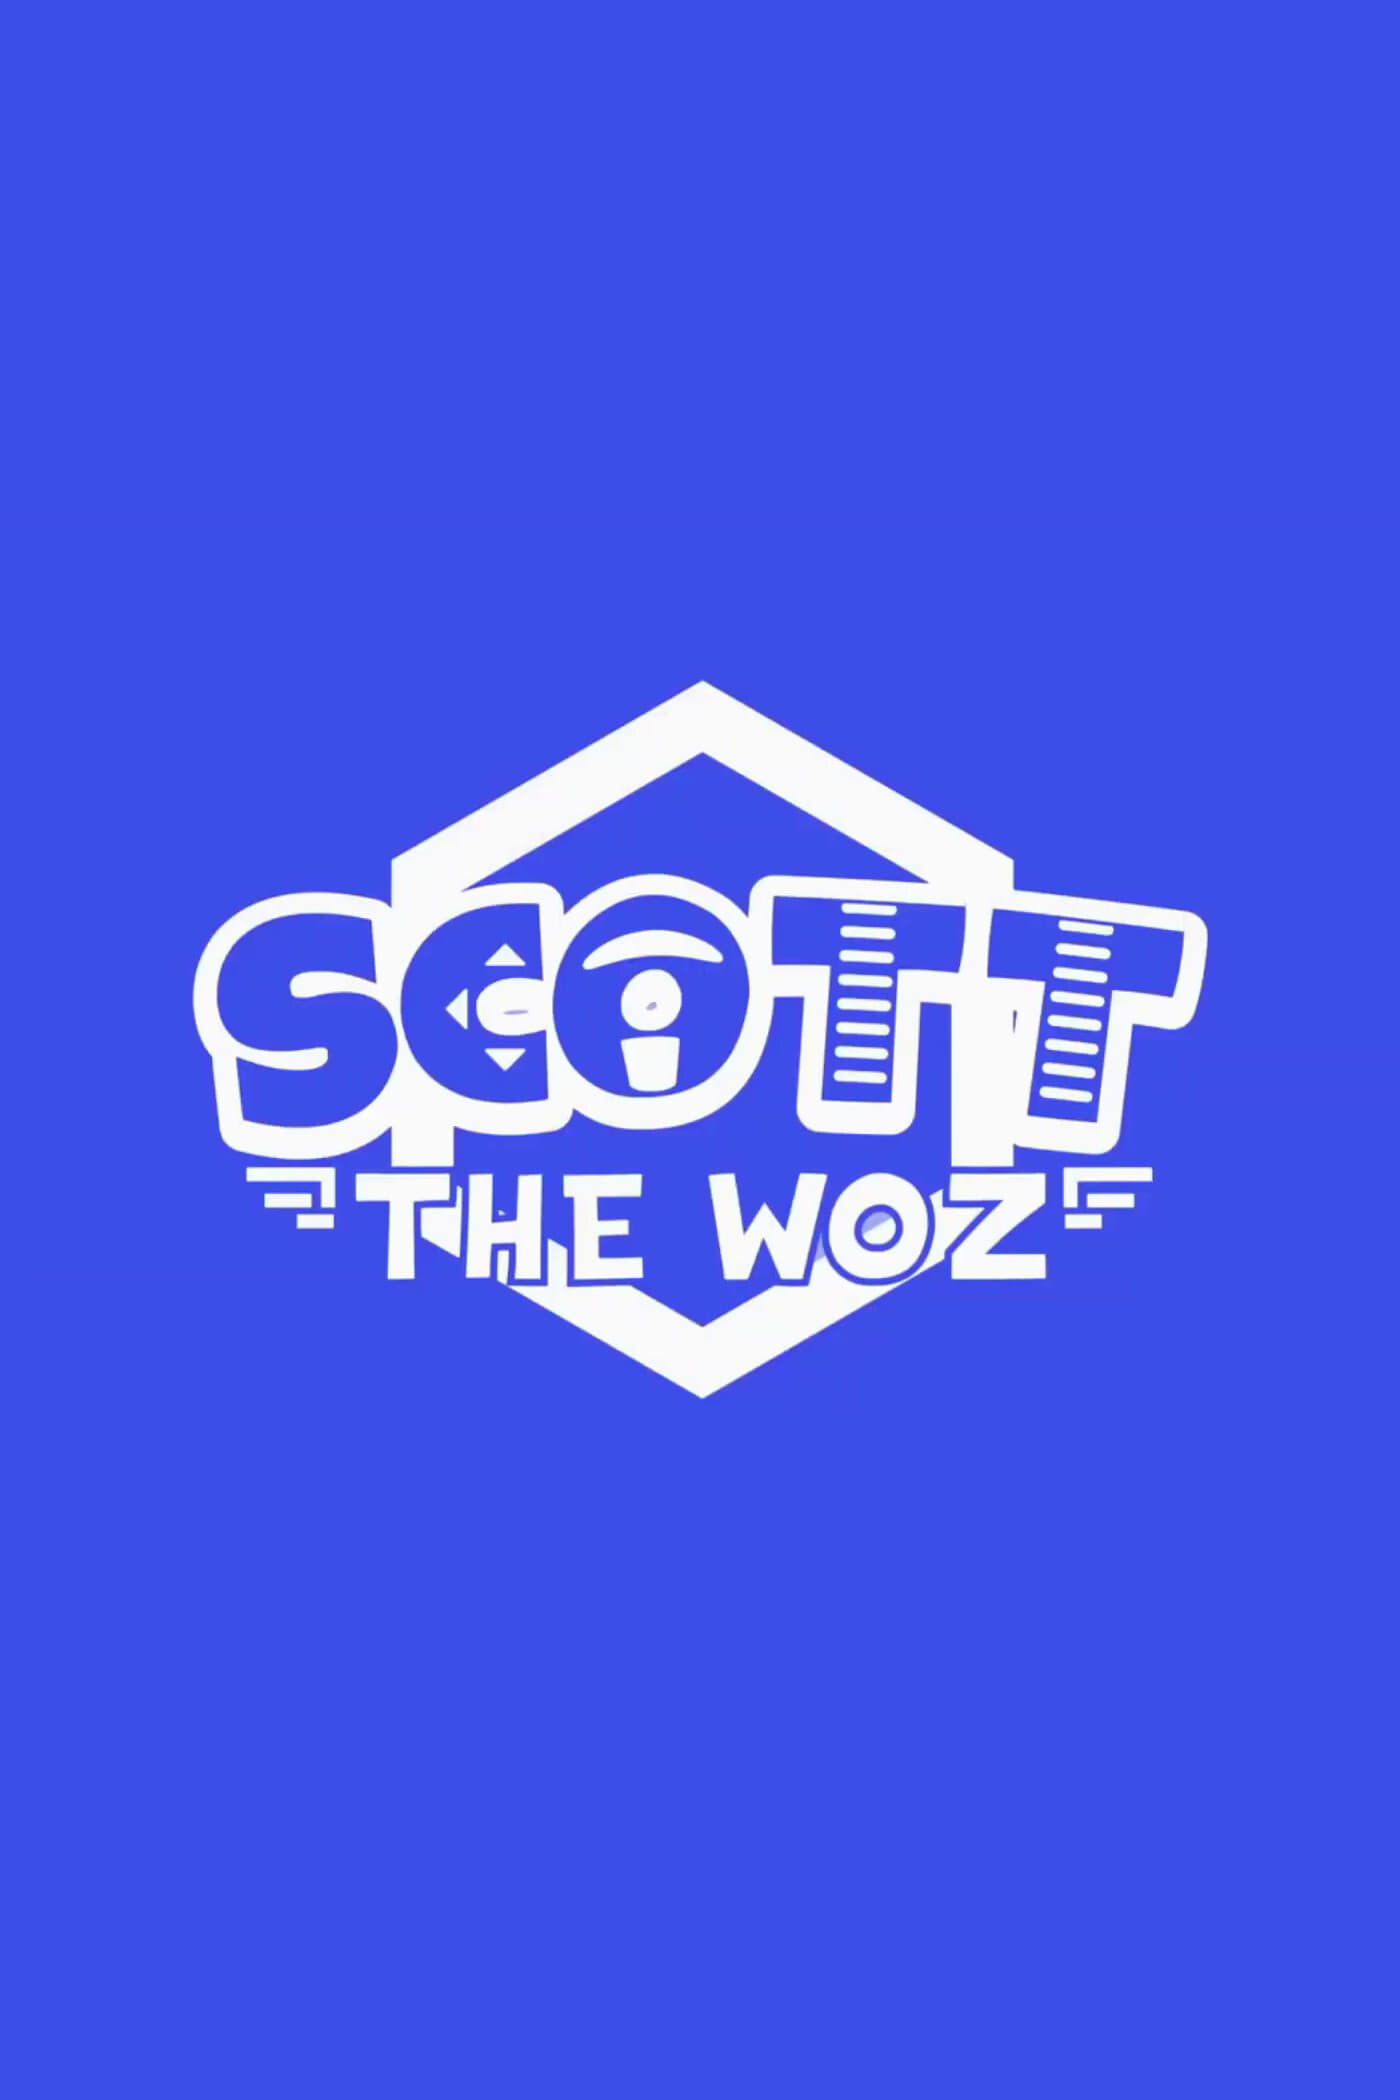 Scott the Woz TV Shows About Satire